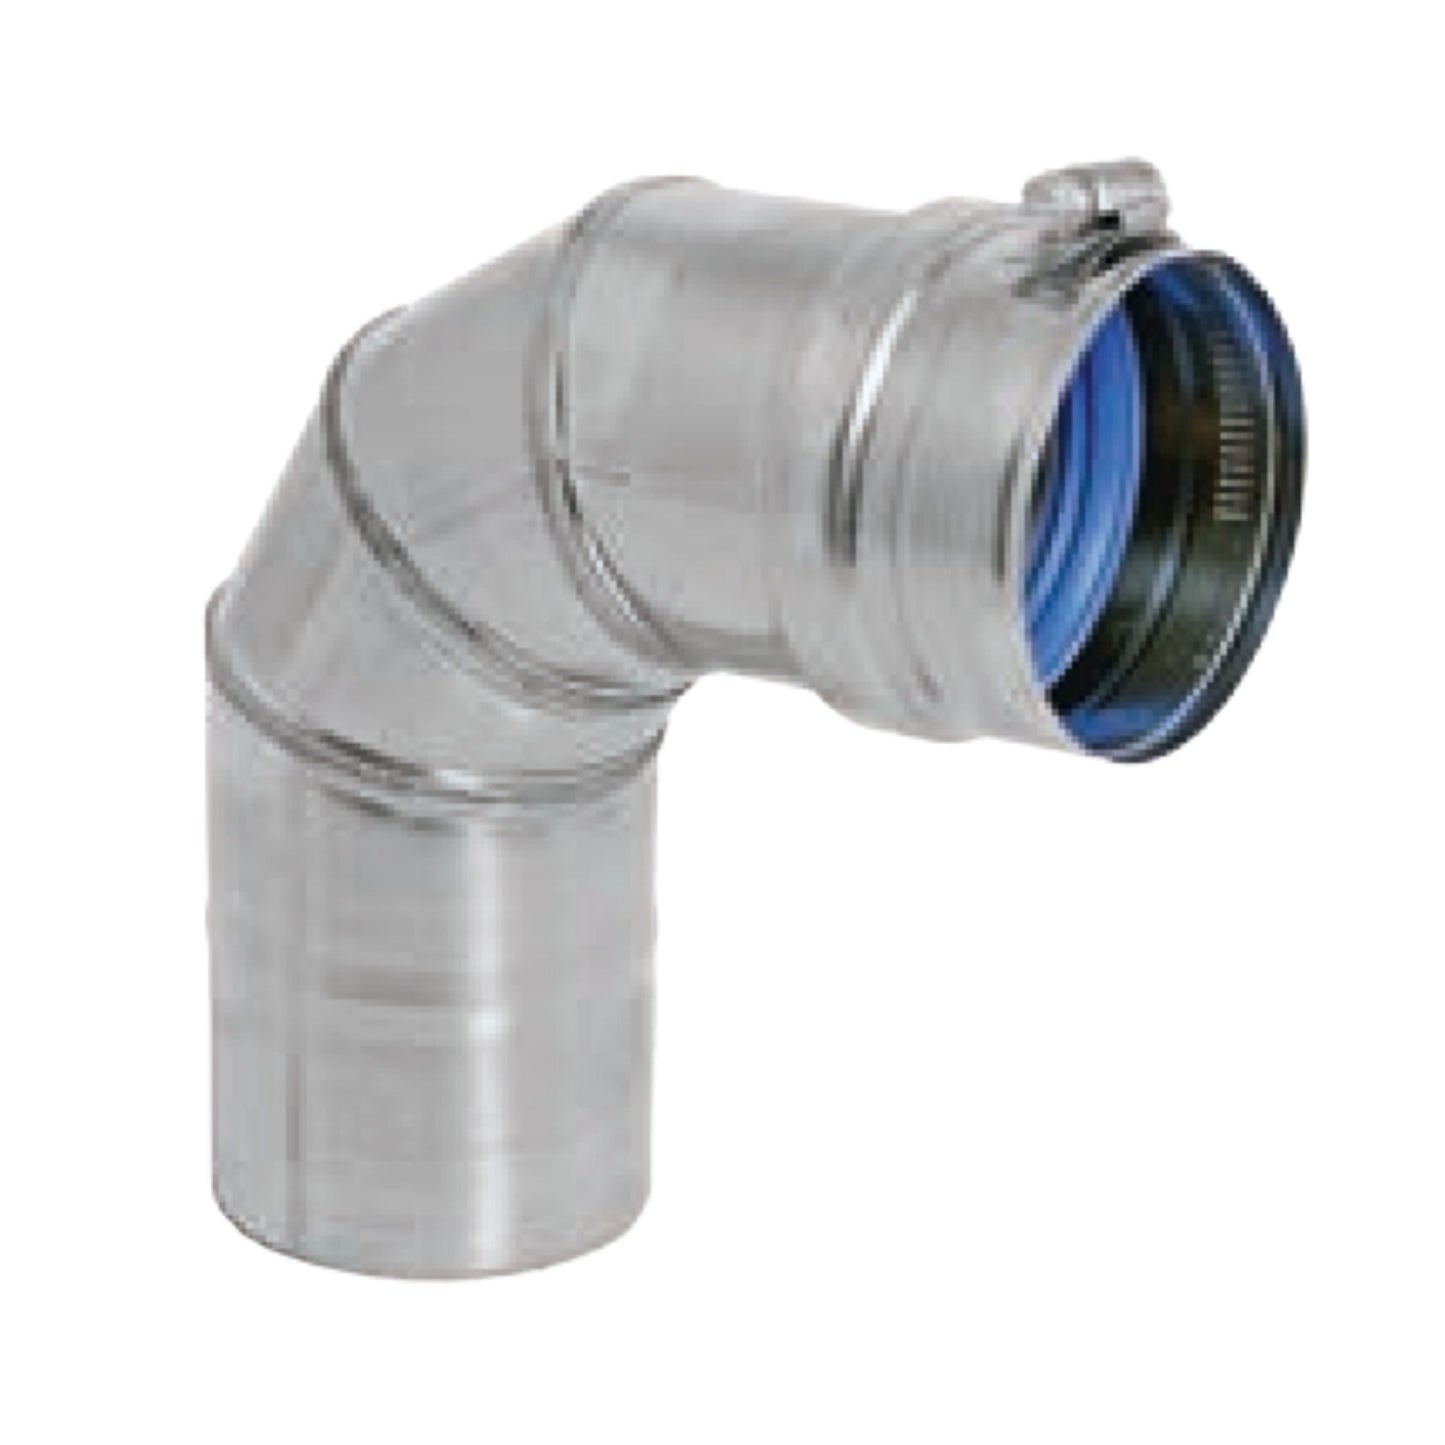 DuraVent FasNSeal 4" 90 Degree 316L Stainless Steel Elbow